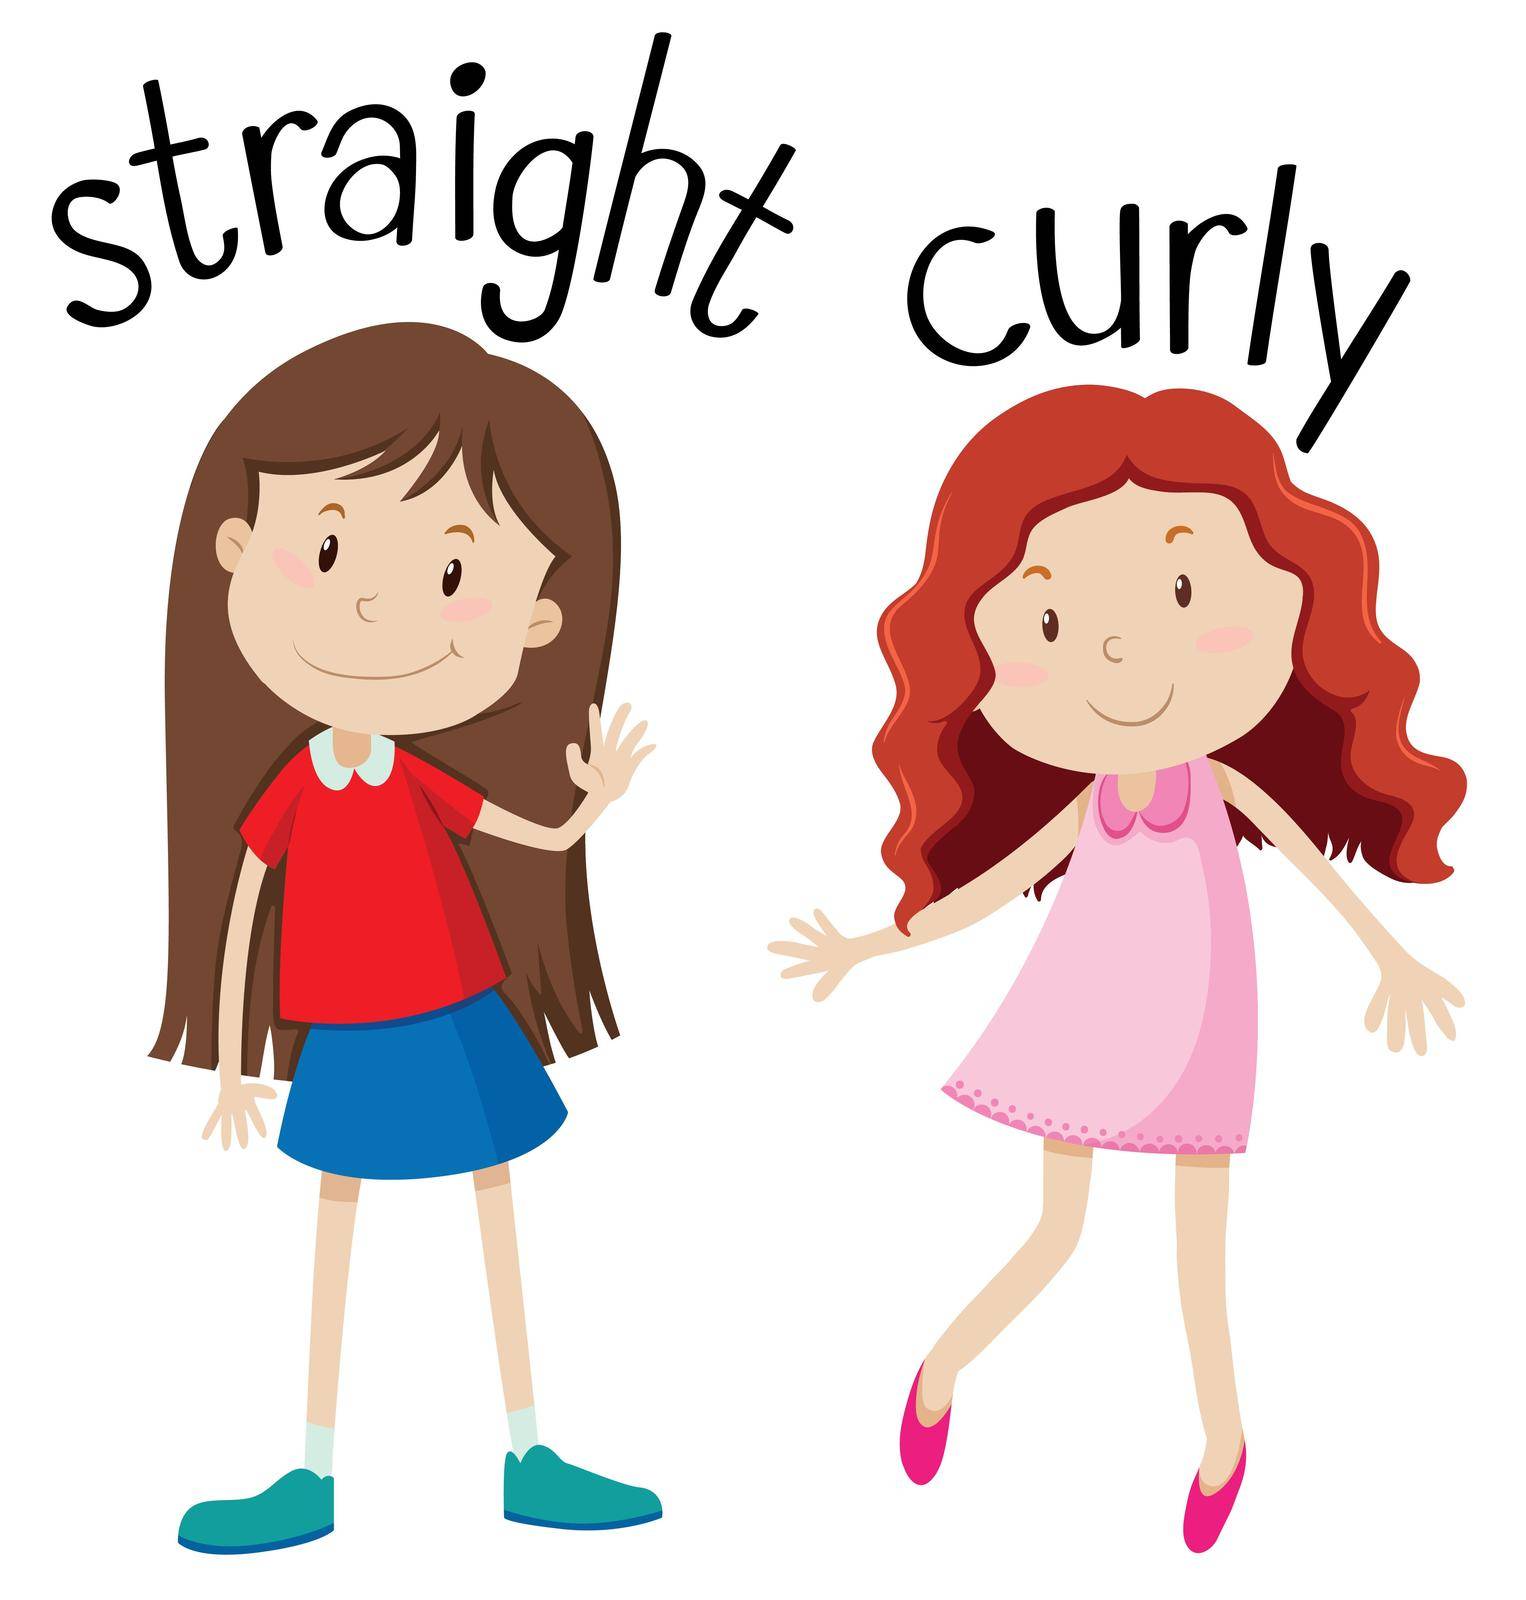 Opposite wordcard for straight and curly illustration